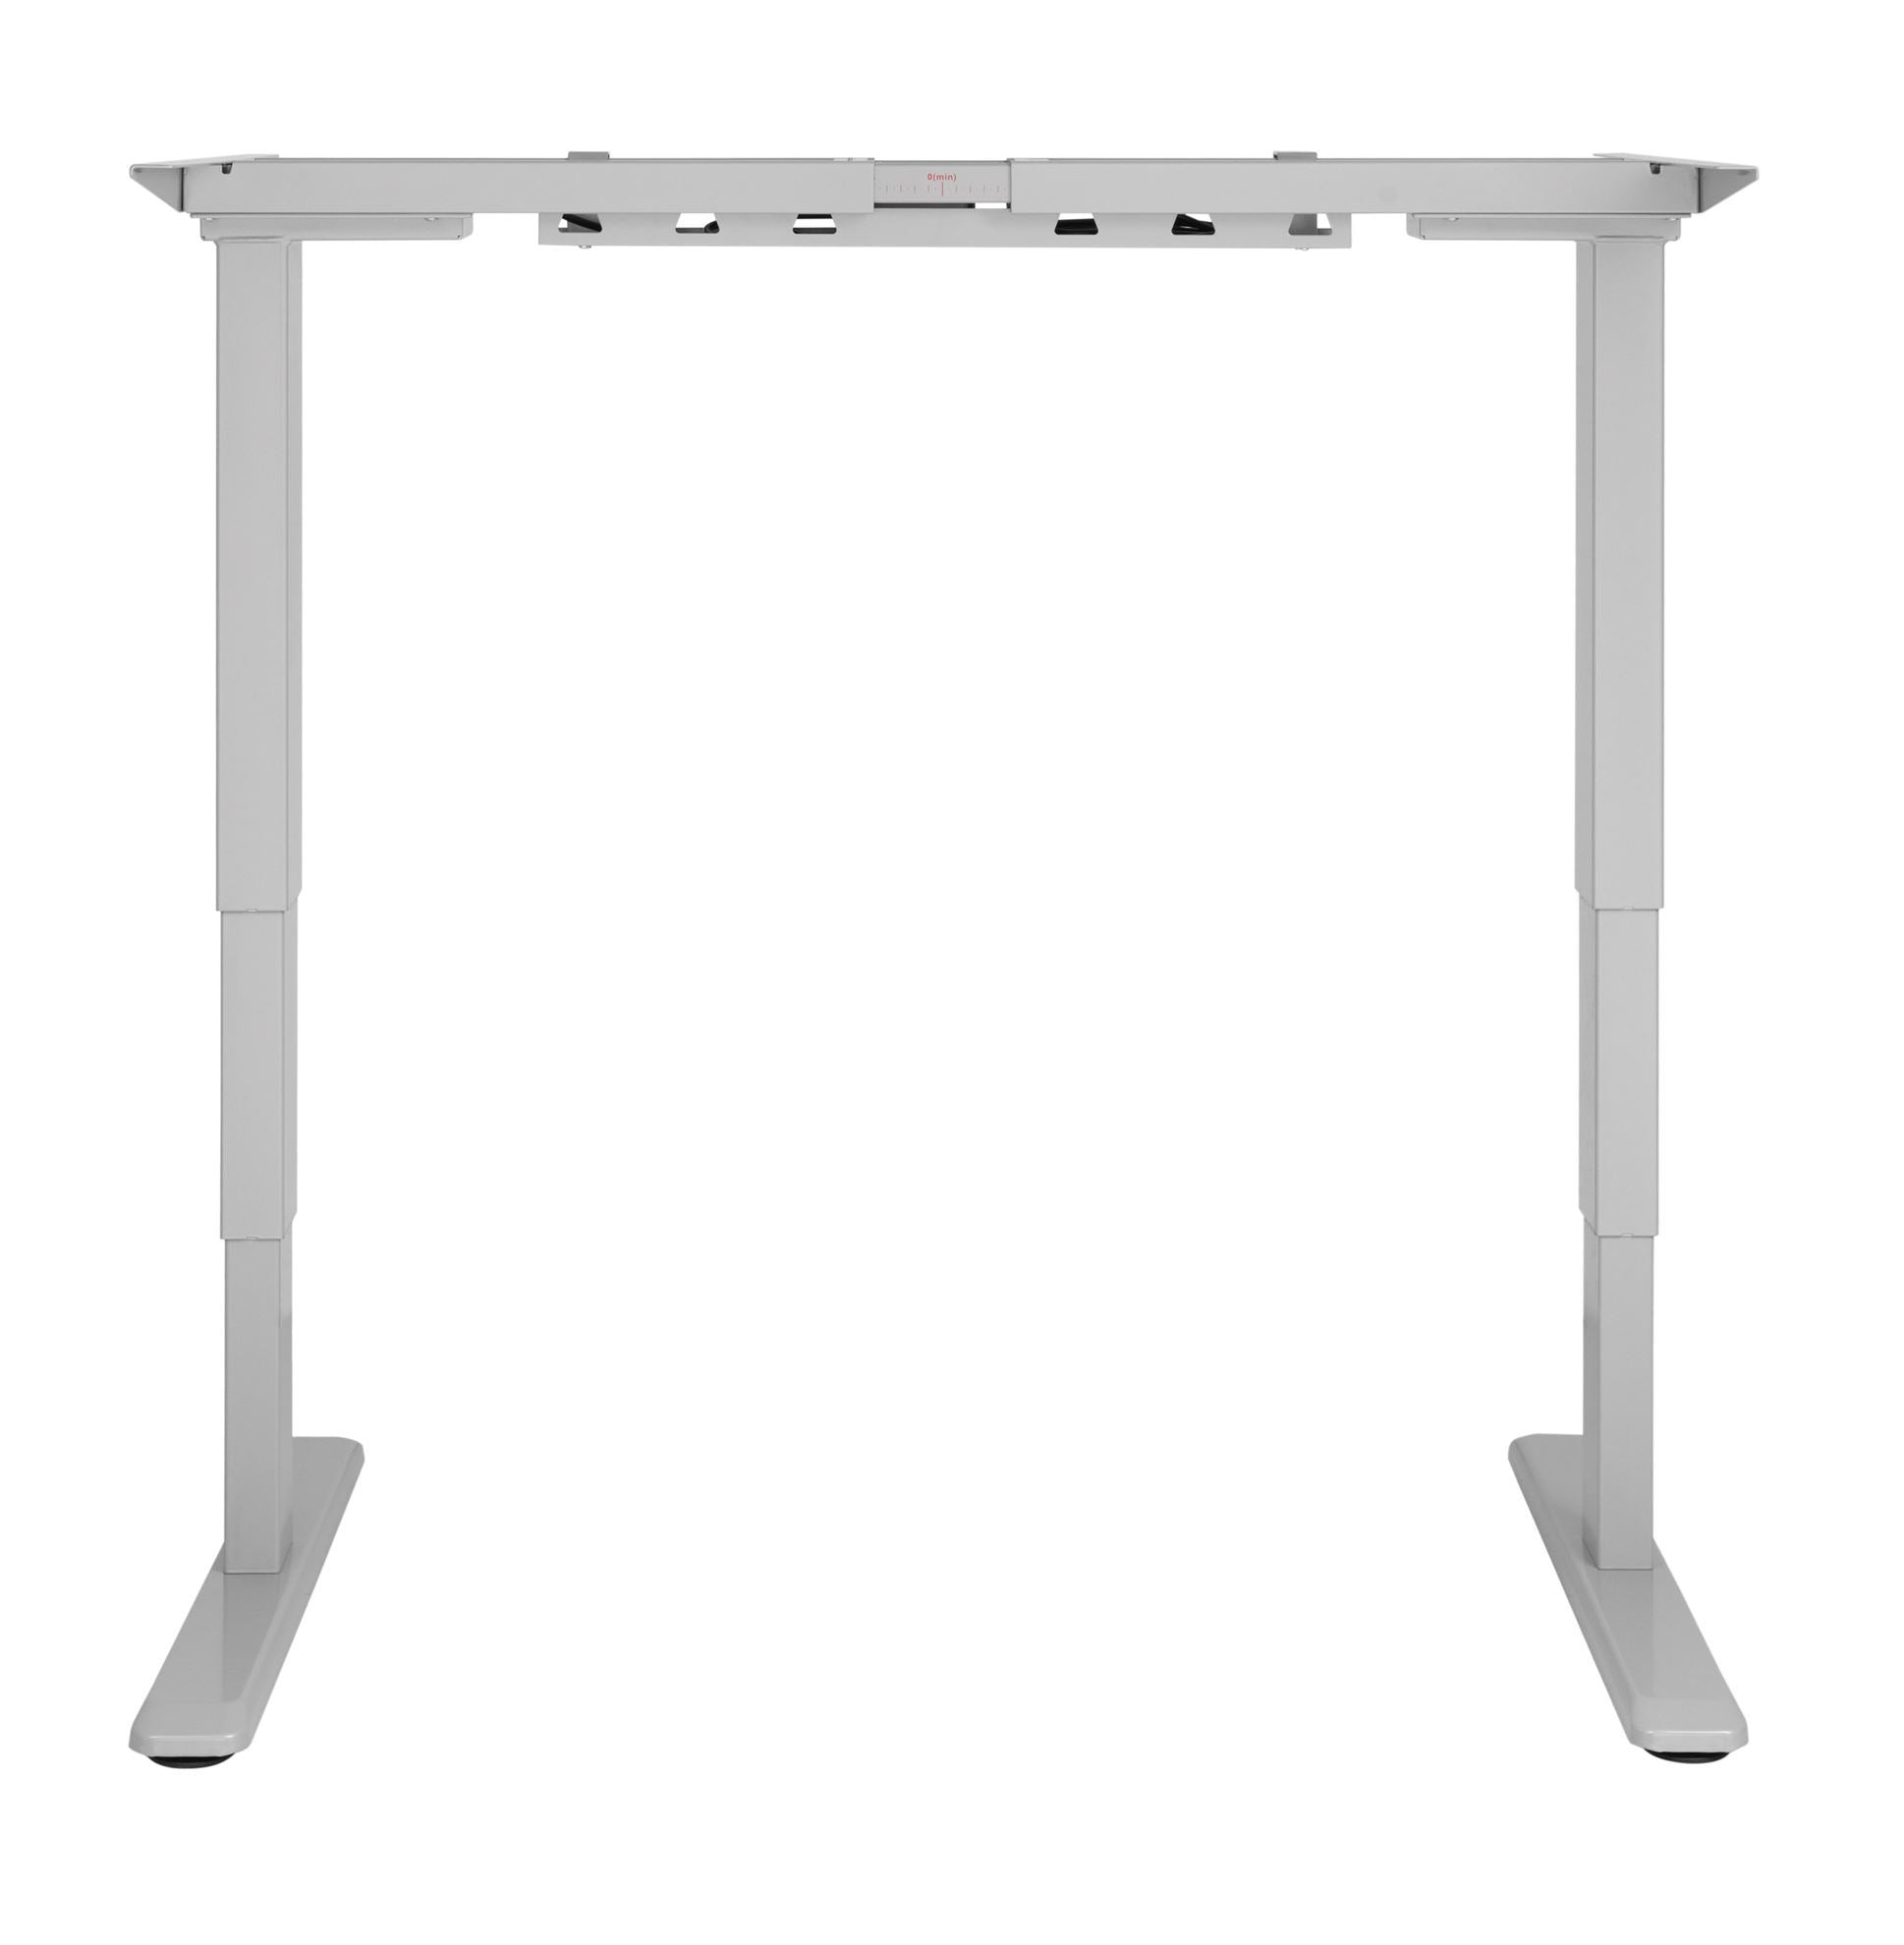 BRATECK_Dual_Motor_Electric_Sit-Stand_Desk_Frame_with_3-Stage_Reverse_Motor._Width_Range_1000_-_1700mm,_Height_Range_620_-_1280mm._Weight_Cap._125kgs._Grey_Colour_*Desk_Top_Purchased_Separately*